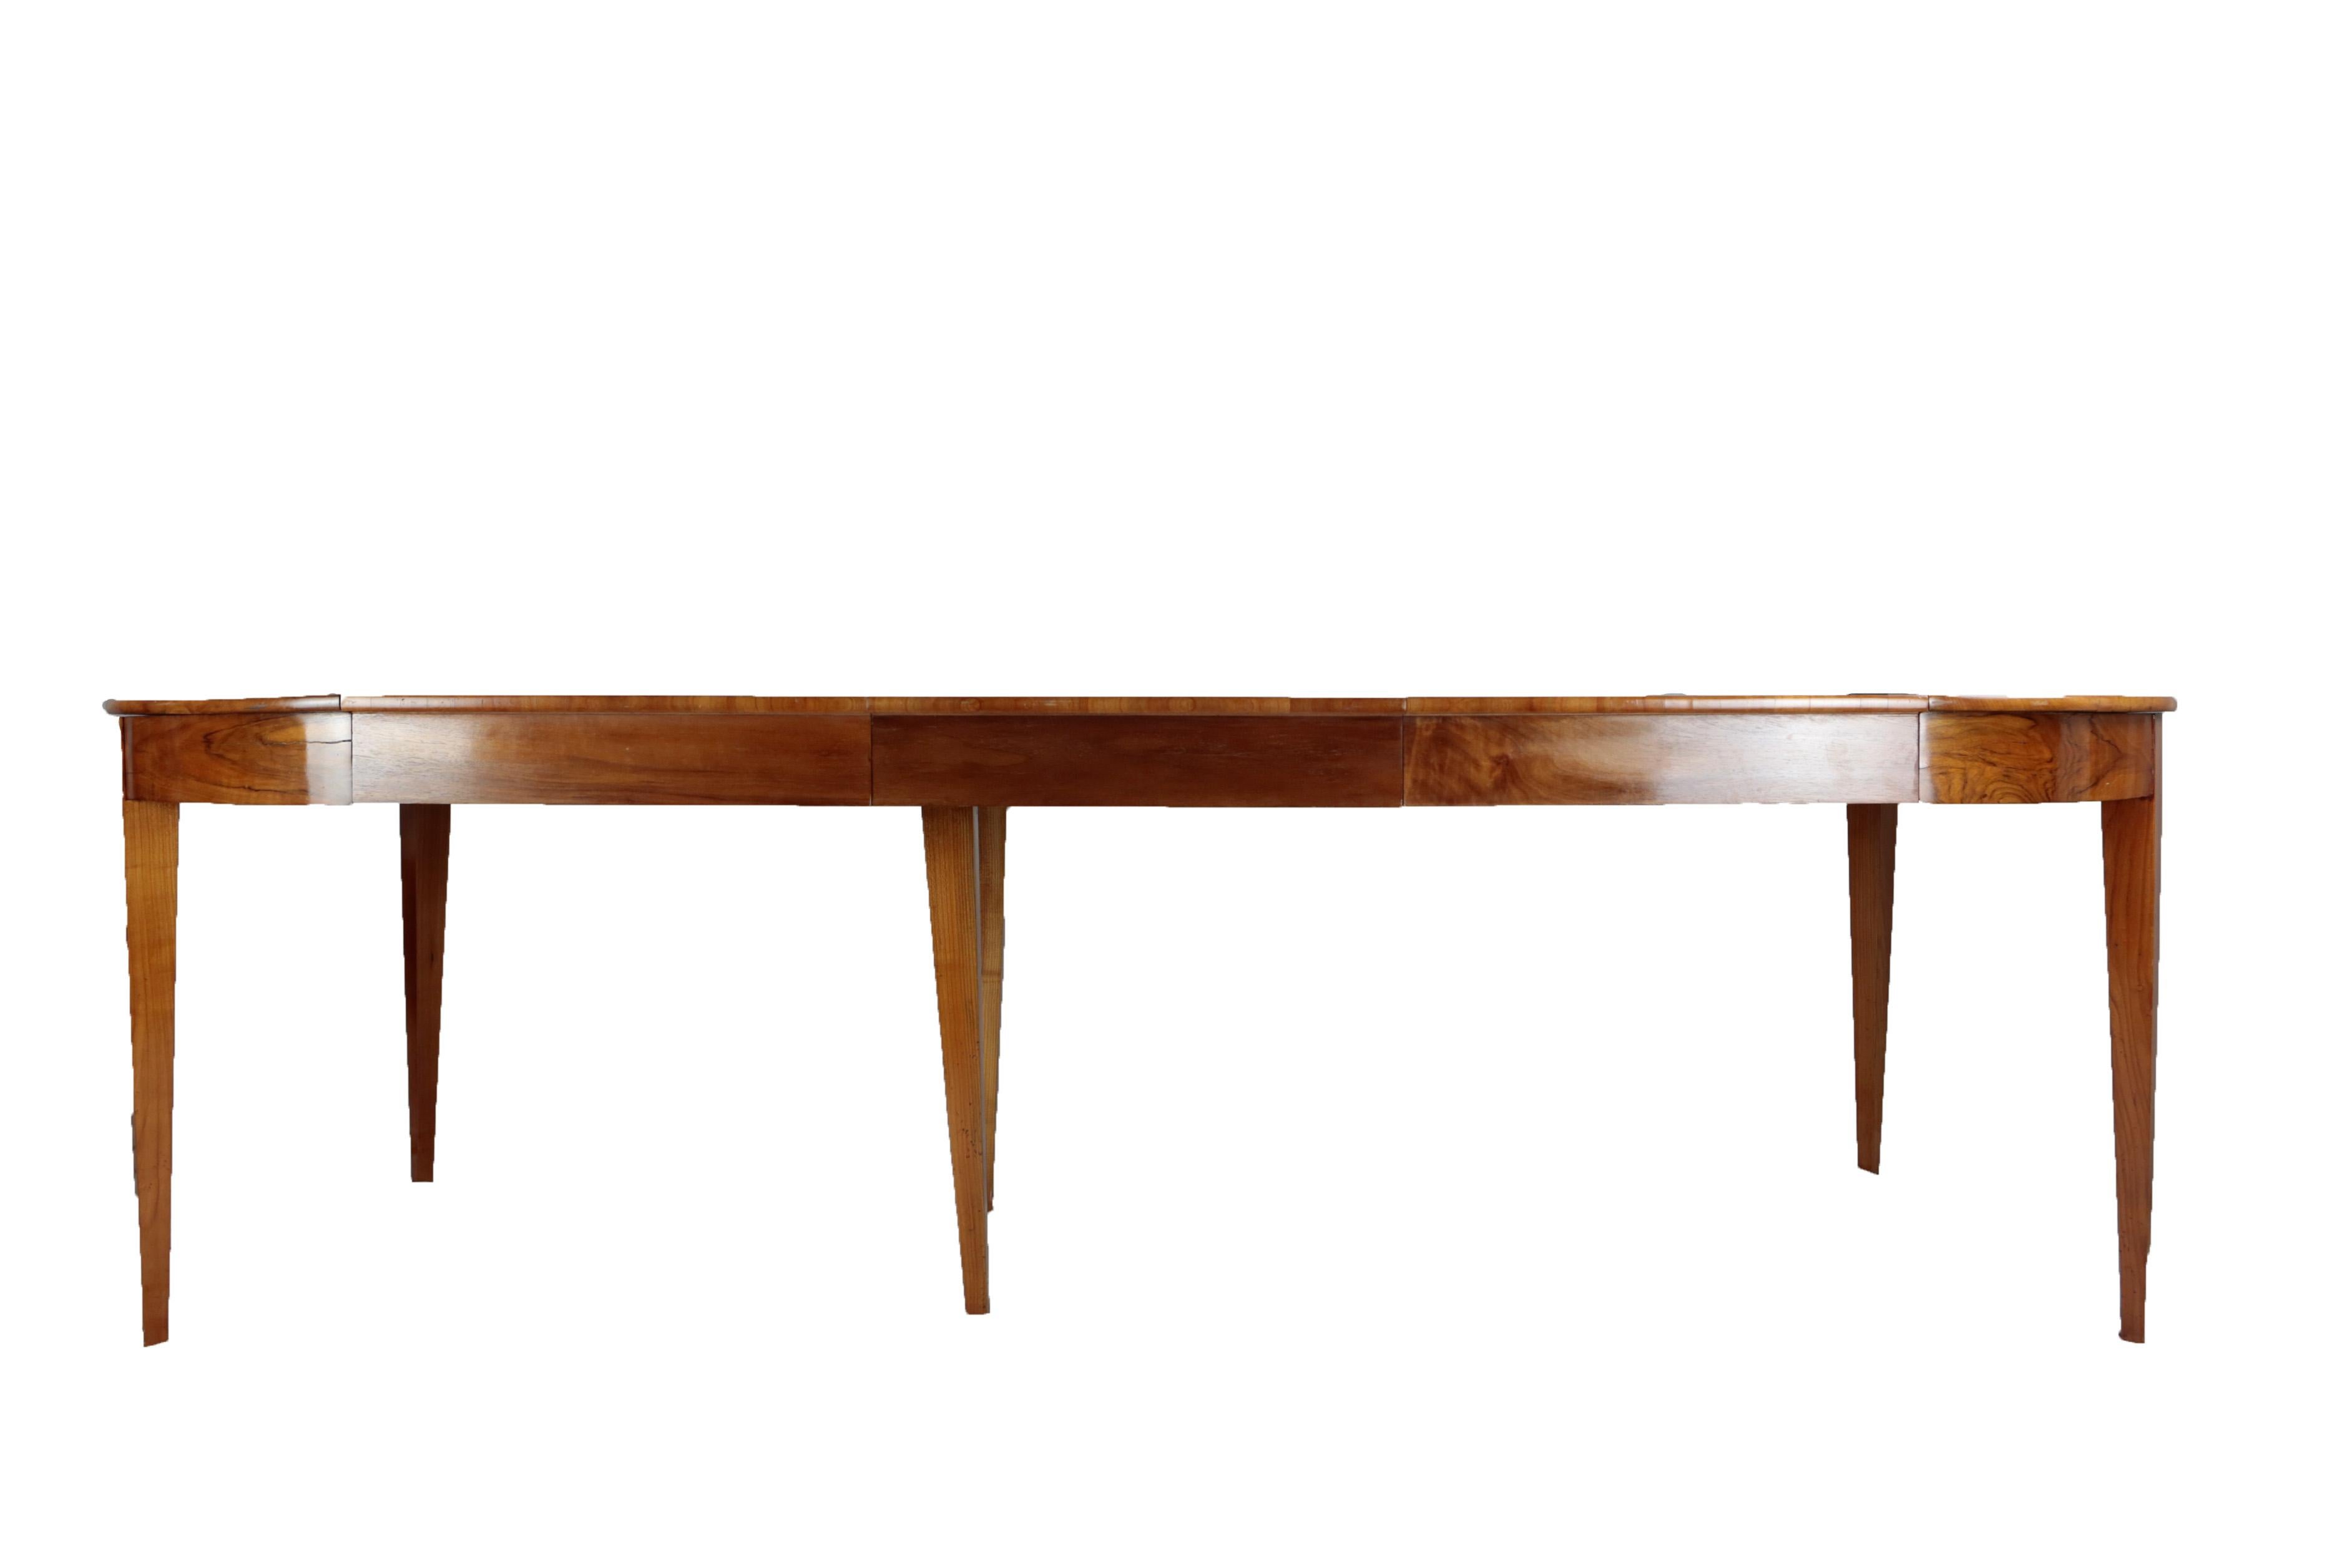 German Biedermeier Period Dining Table, circa 1830-1840, Cherry and Nutwood, Extendable For Sale